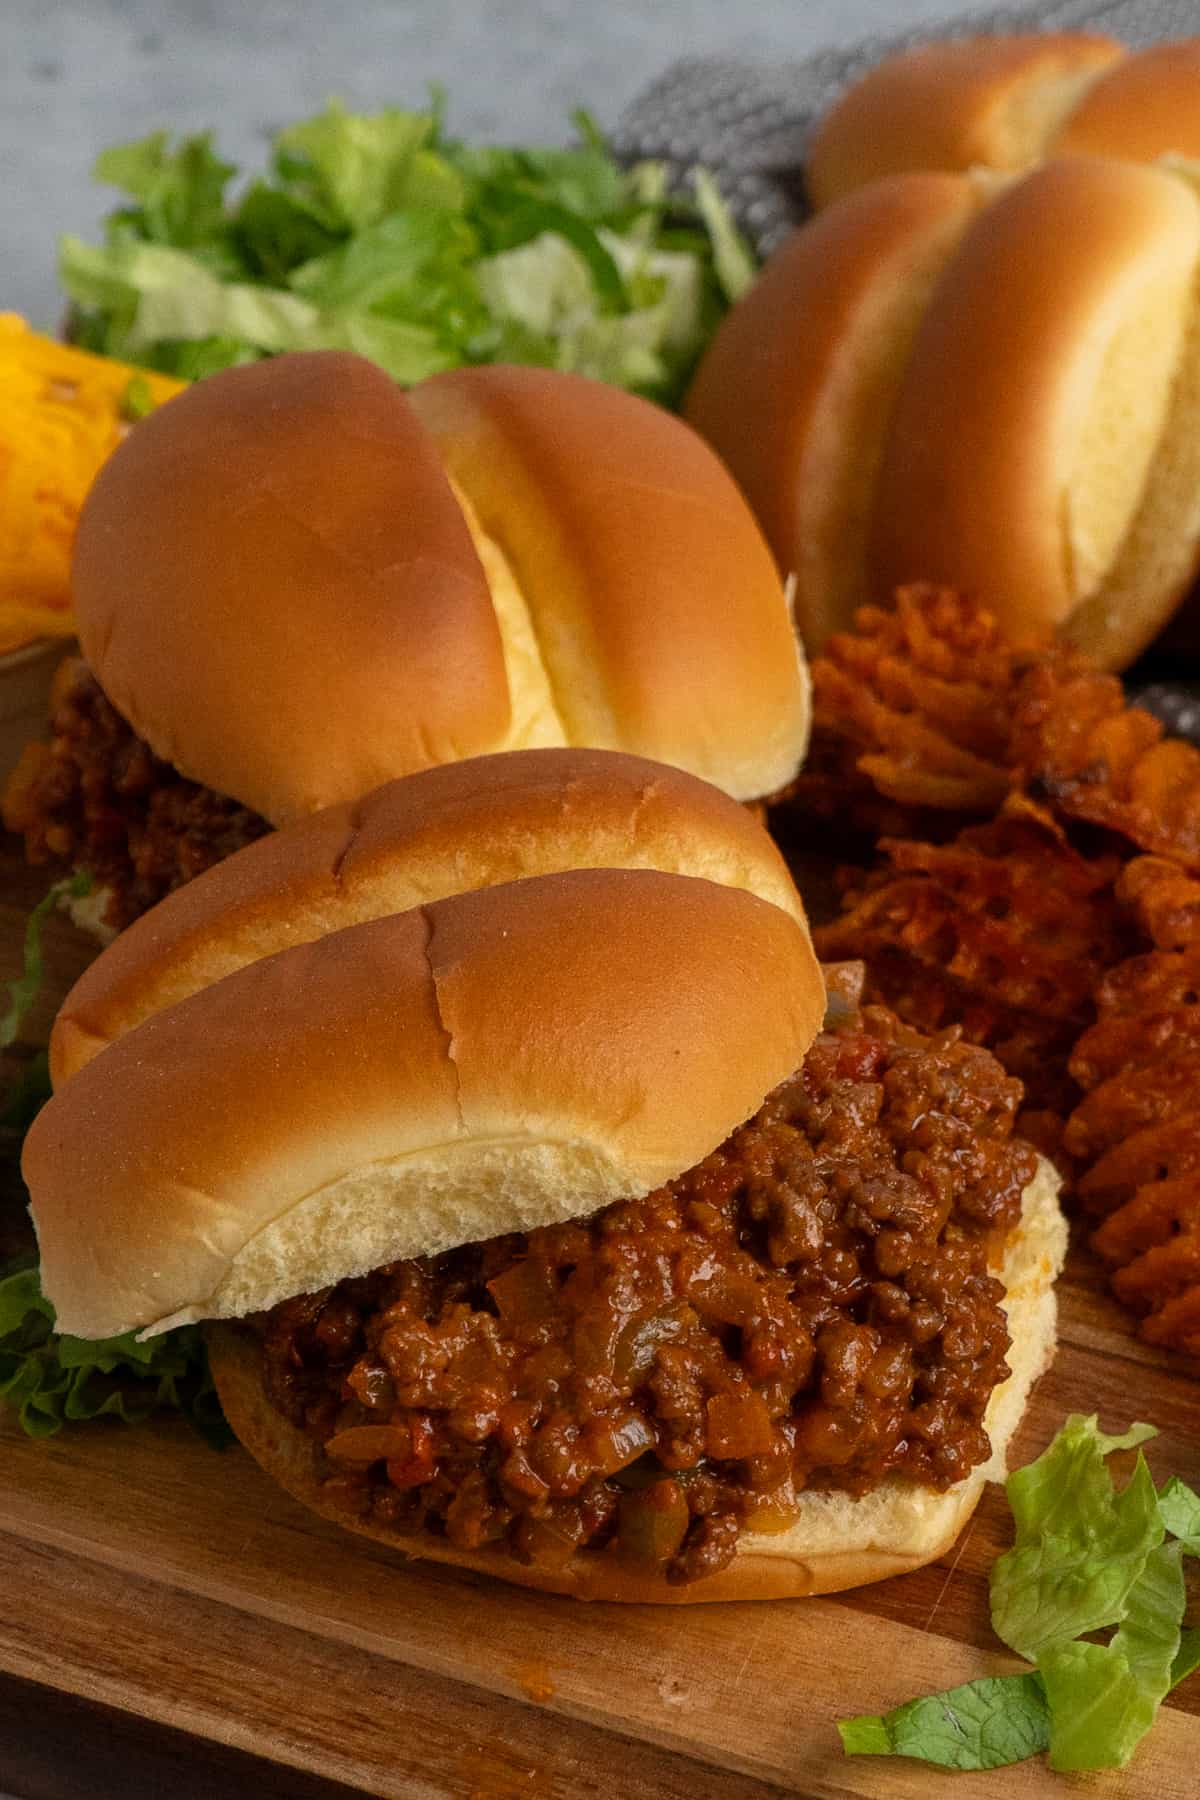 Side view of sloppy Joes on a wood cutting board.